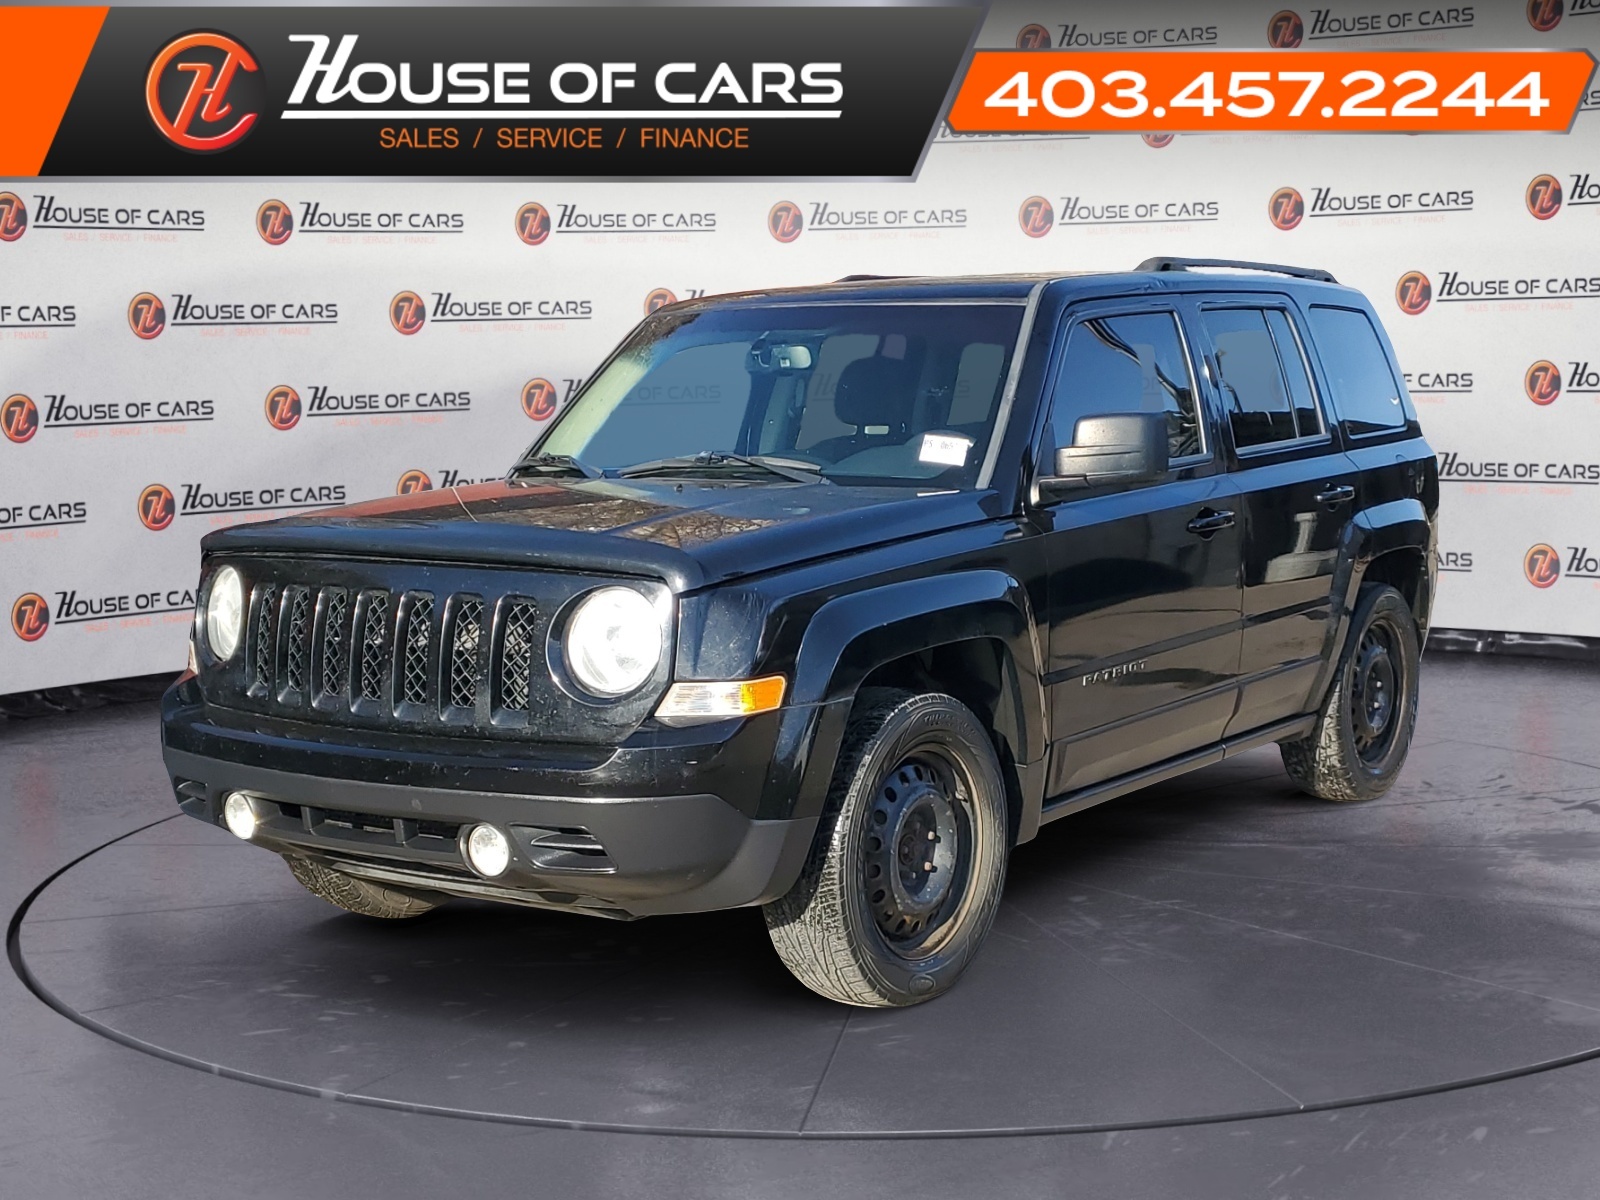 2014 Jeep Patriot FWD 4dr Heated Seats Sunroof Leather Seats  